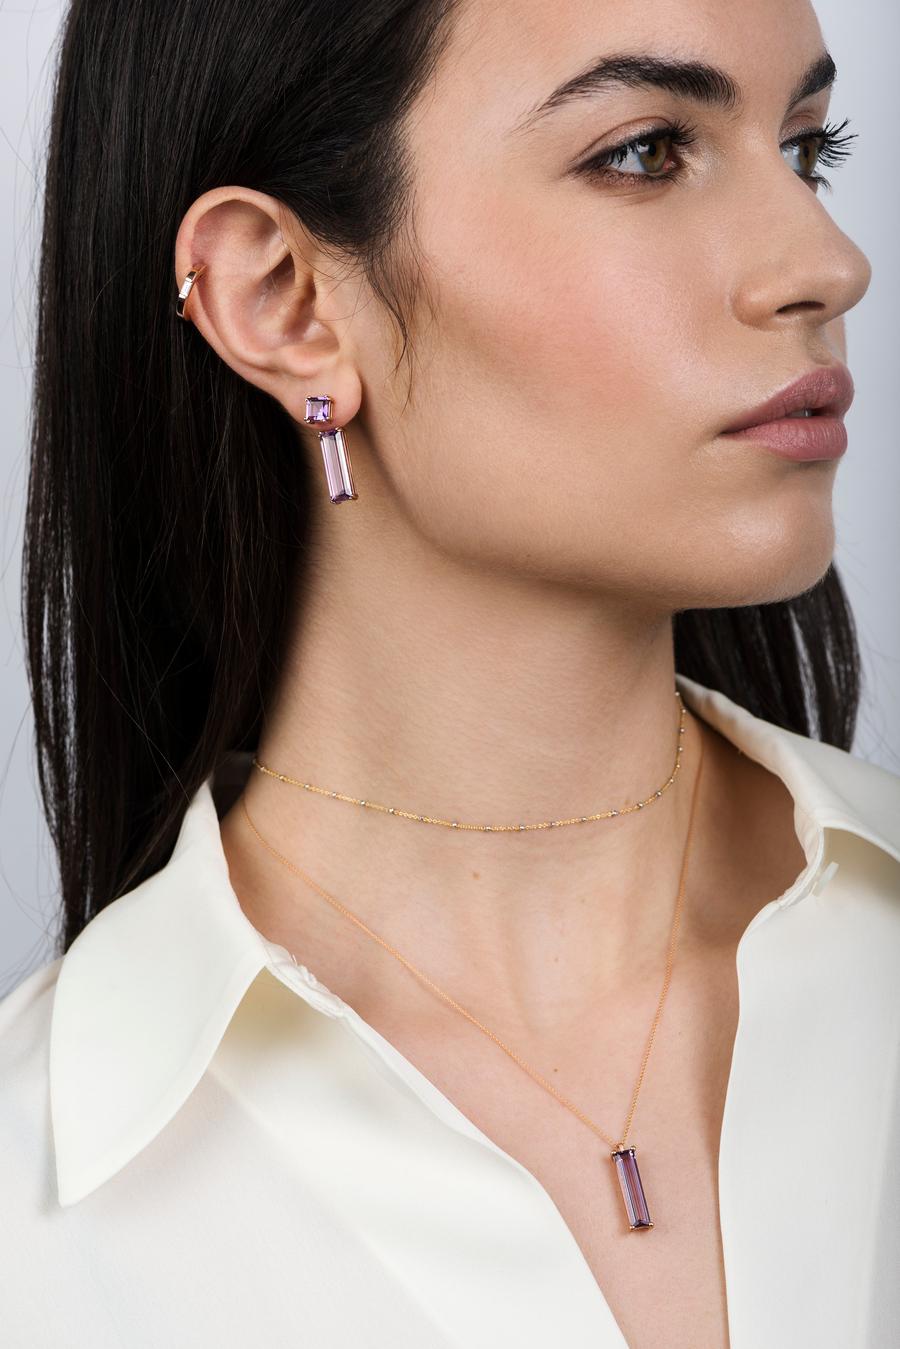 14K Rose Gold Purple Amethyst Gem Bar Marilyn Earring Extenders. (Extender only, Stud earrings sold separately).
Gold Weight: 3.36 grams.
Amethyst Carats: 8.00 ct.
Wear and customize with Neo Classic stud earrings, or with any studs of your